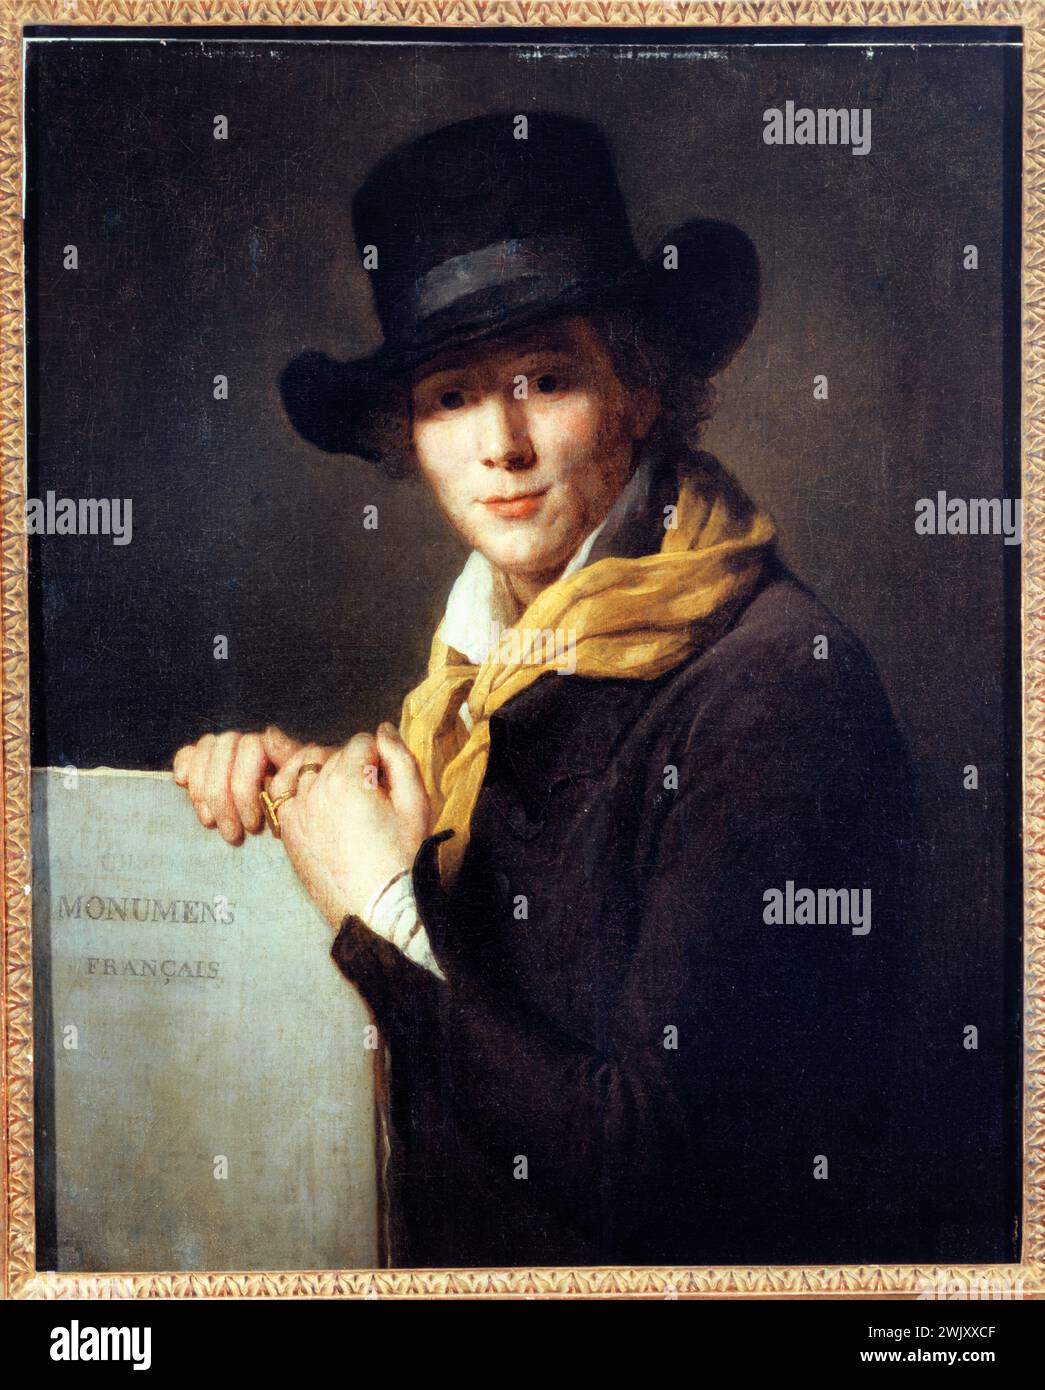 Marie-Geneviève Bouliard (1763-1825). 'Alexandre Lenoir (1761-1839), founder of the museum of French monuments'. Oil on canvas marouflaged on wood. Paris, Carnavalet museum. 27118-12 Archeologist, founder Musee French monuments, oil on canvas marouflee on wood, French painter, portrait Stock Photo